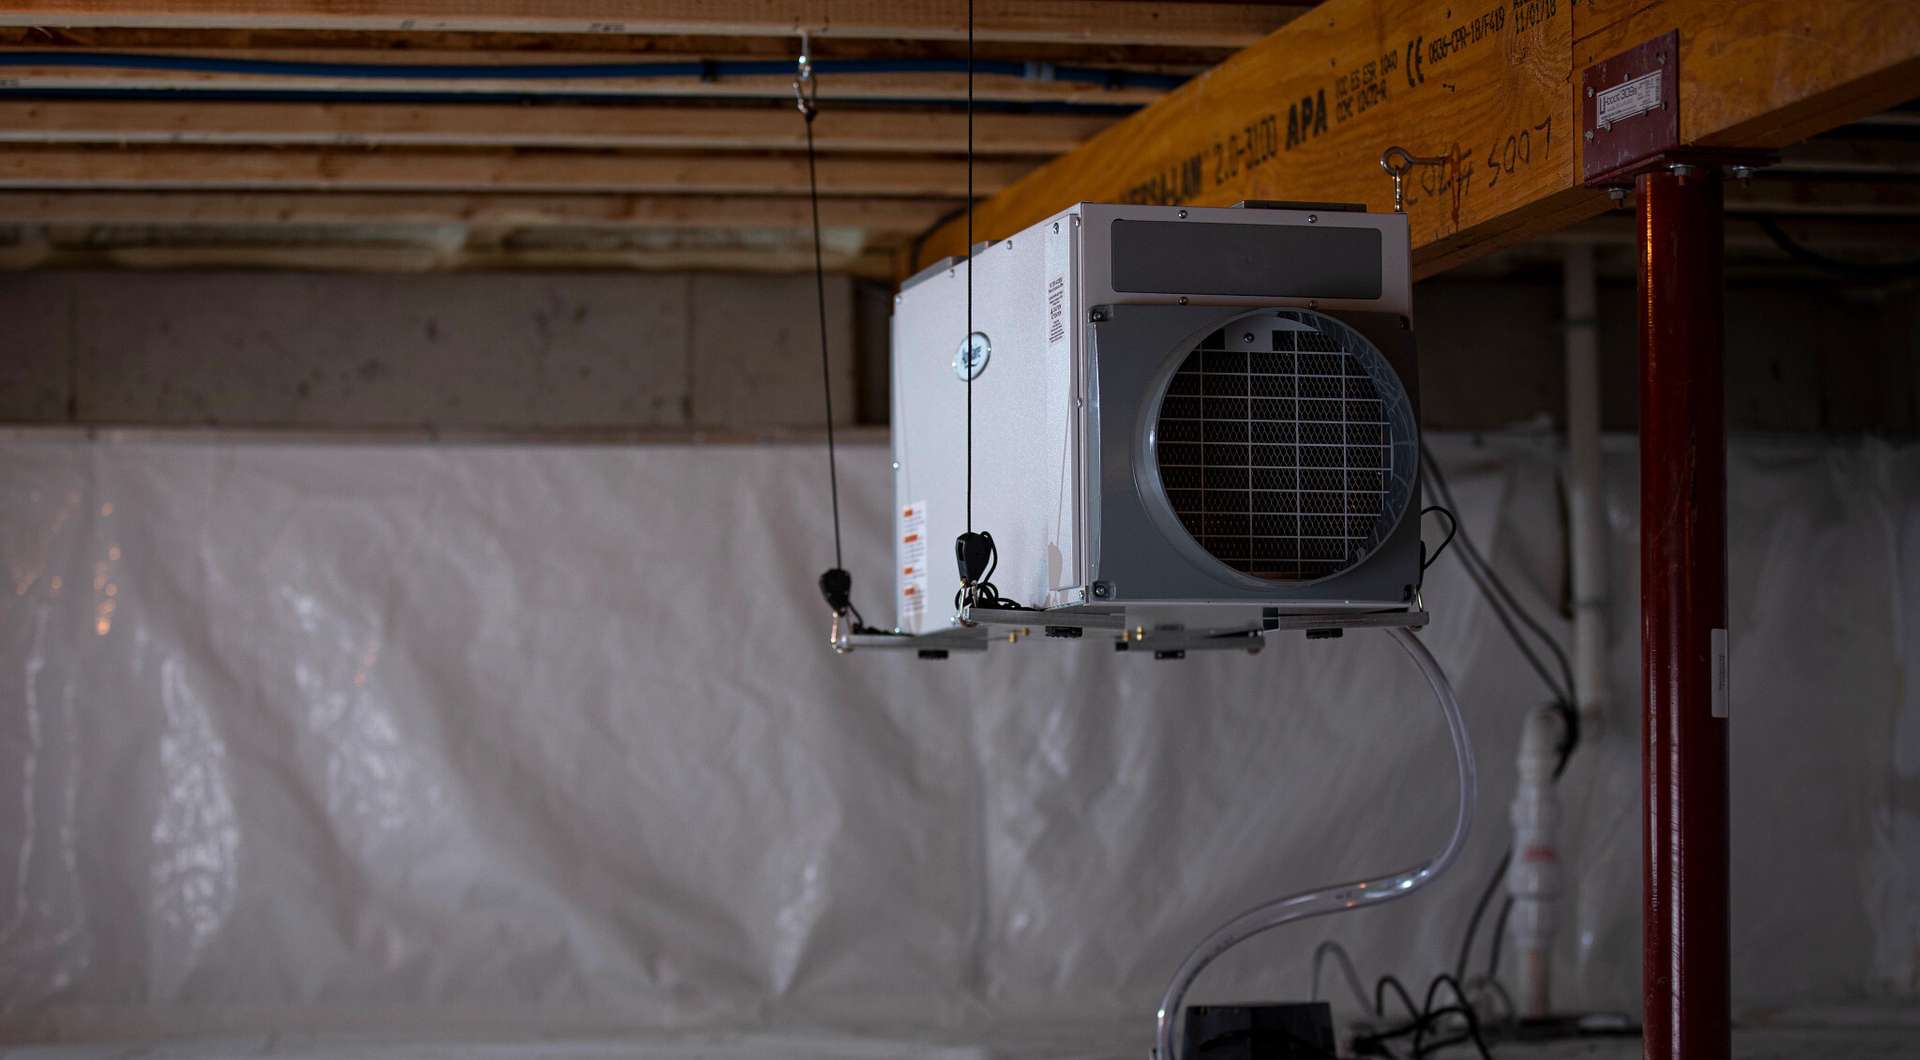 crawl space dehumidifier installed with encapsulation vapor barriers